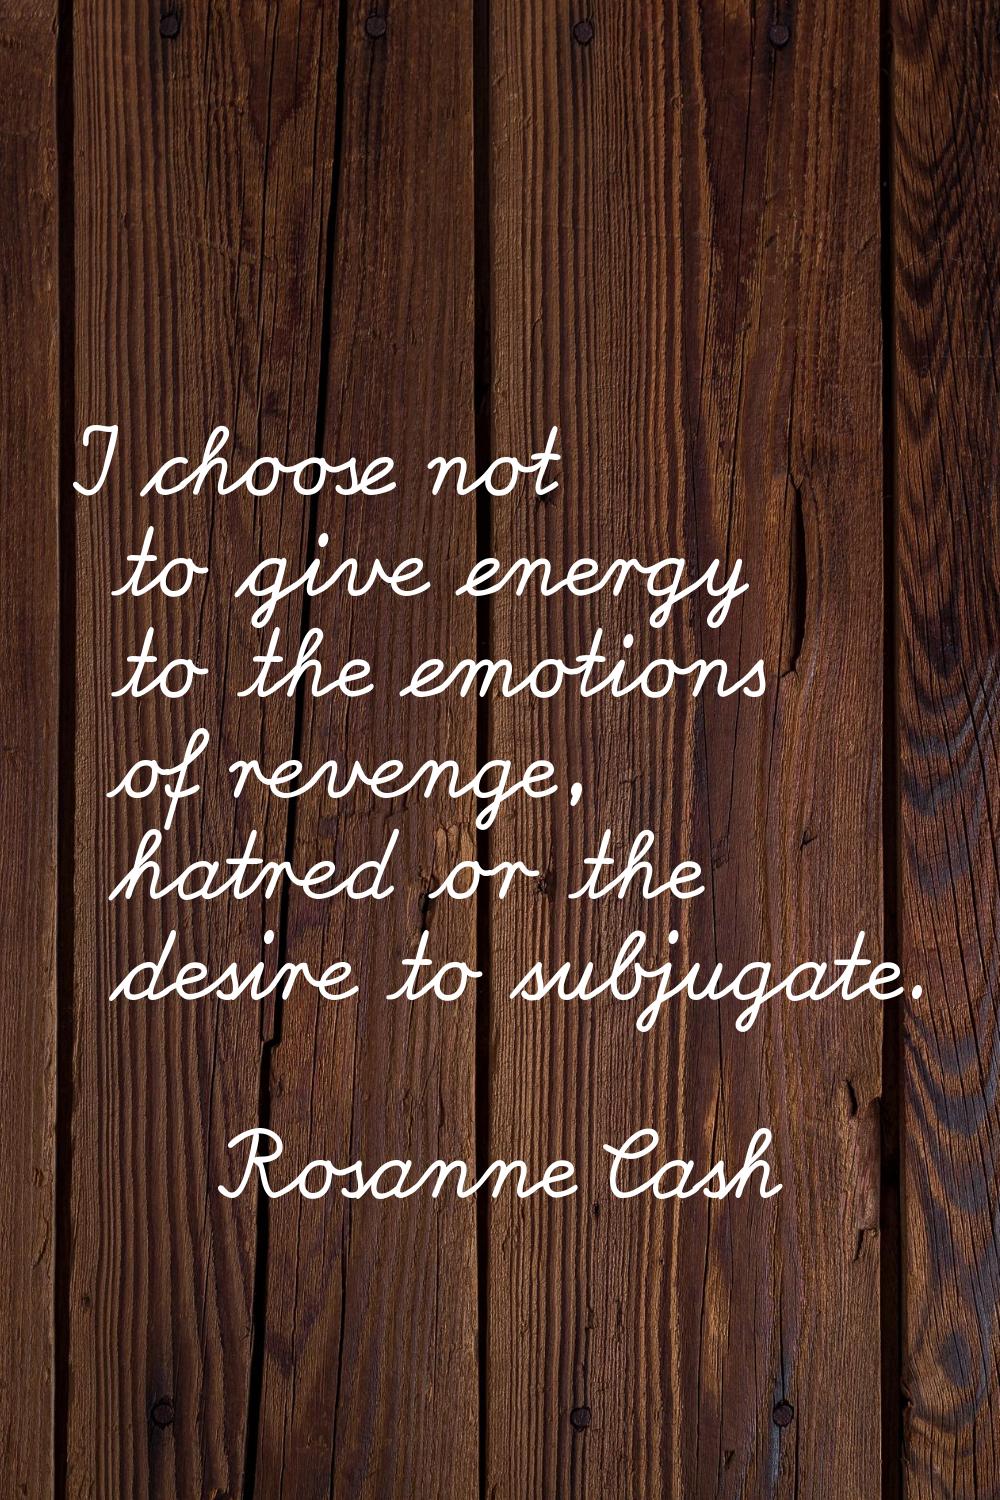 I choose not to give energy to the emotions of revenge, hatred or the desire to subjugate.